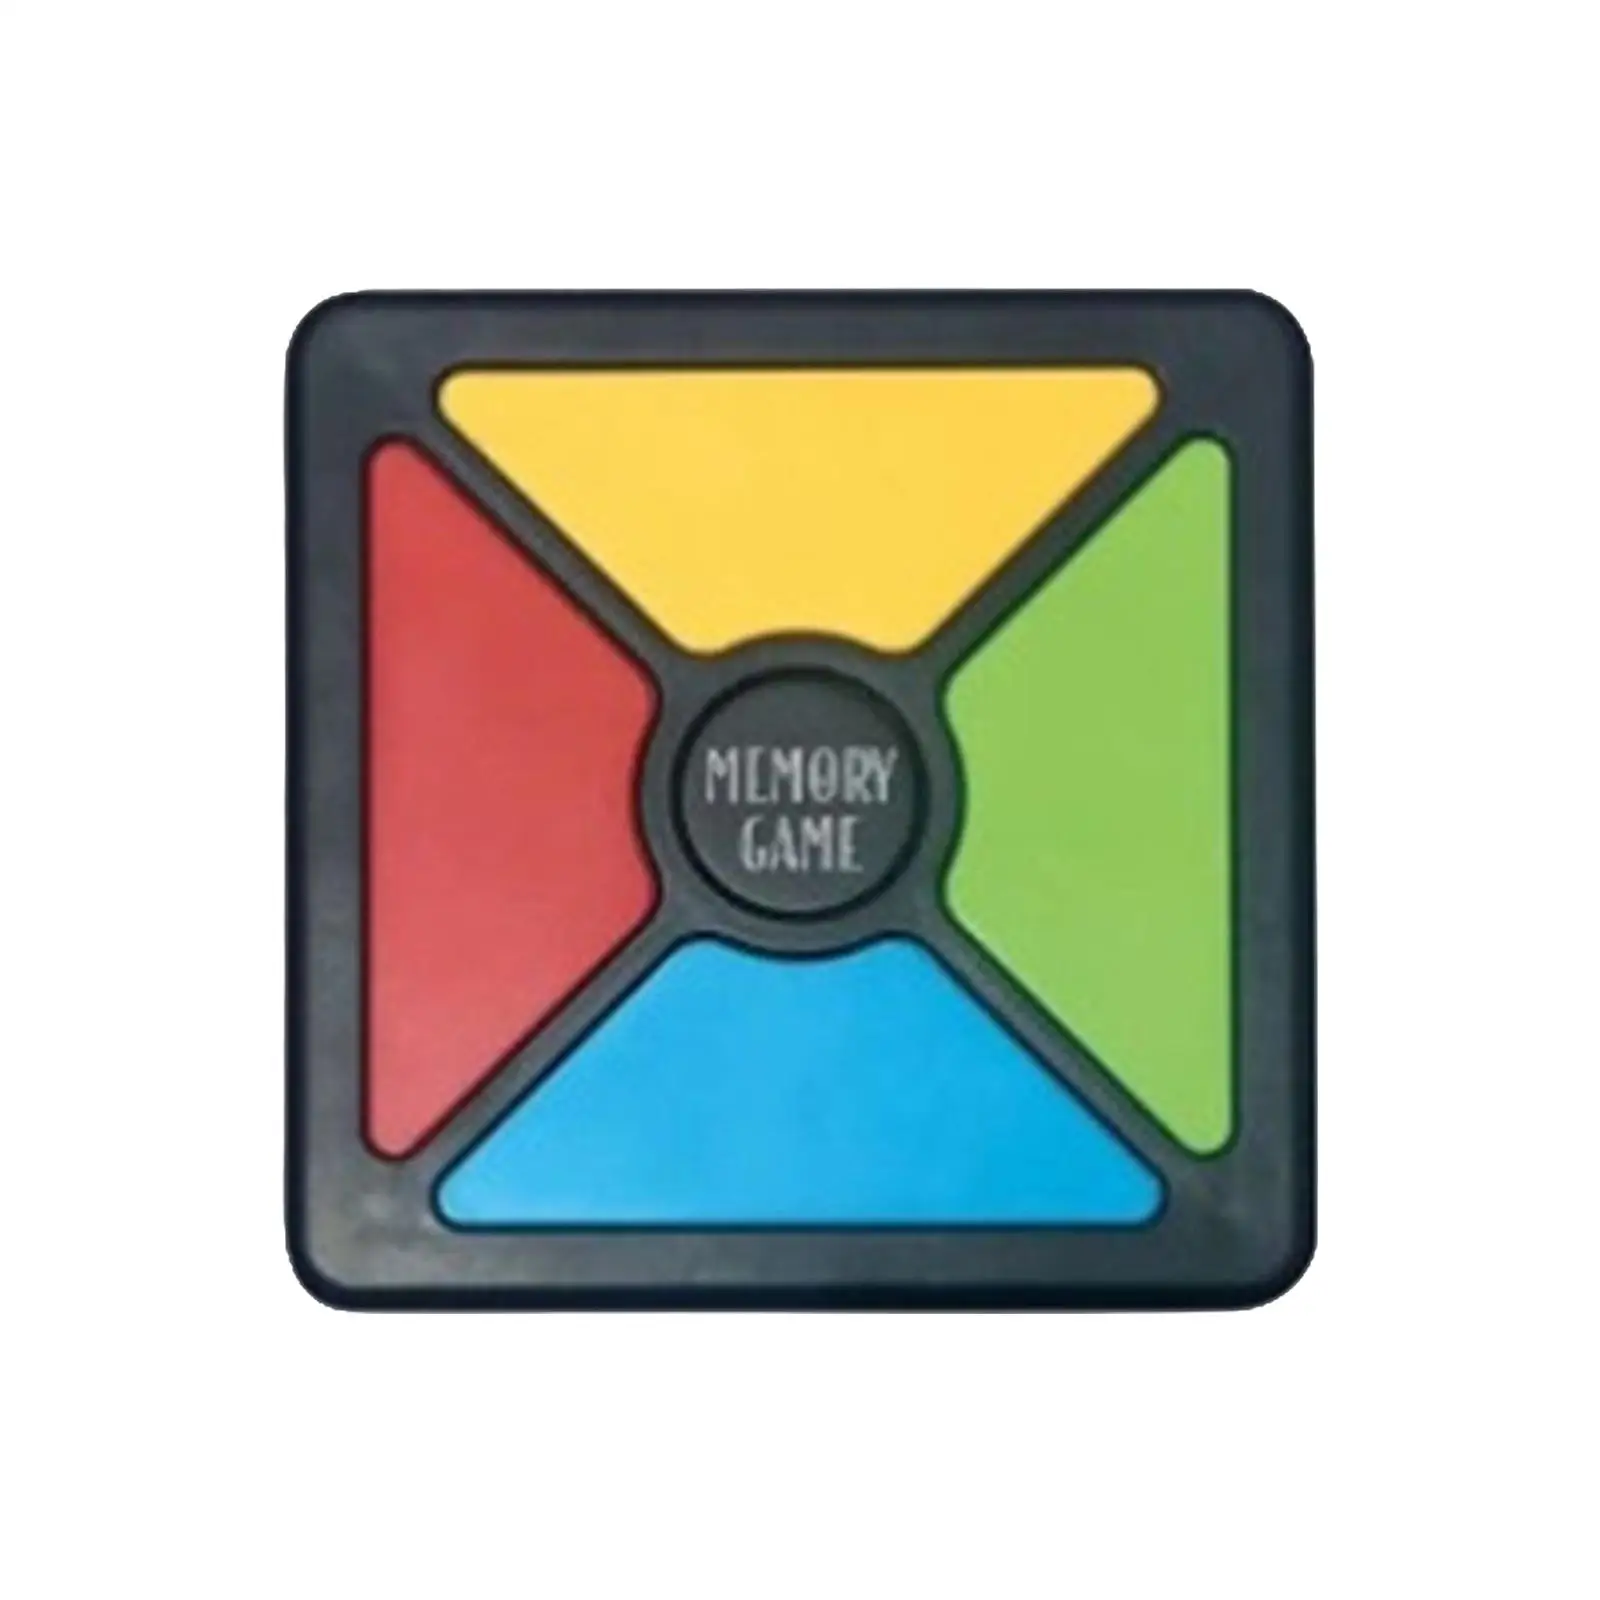 Memory game stem with Light Sounds Color Recognition for Patience